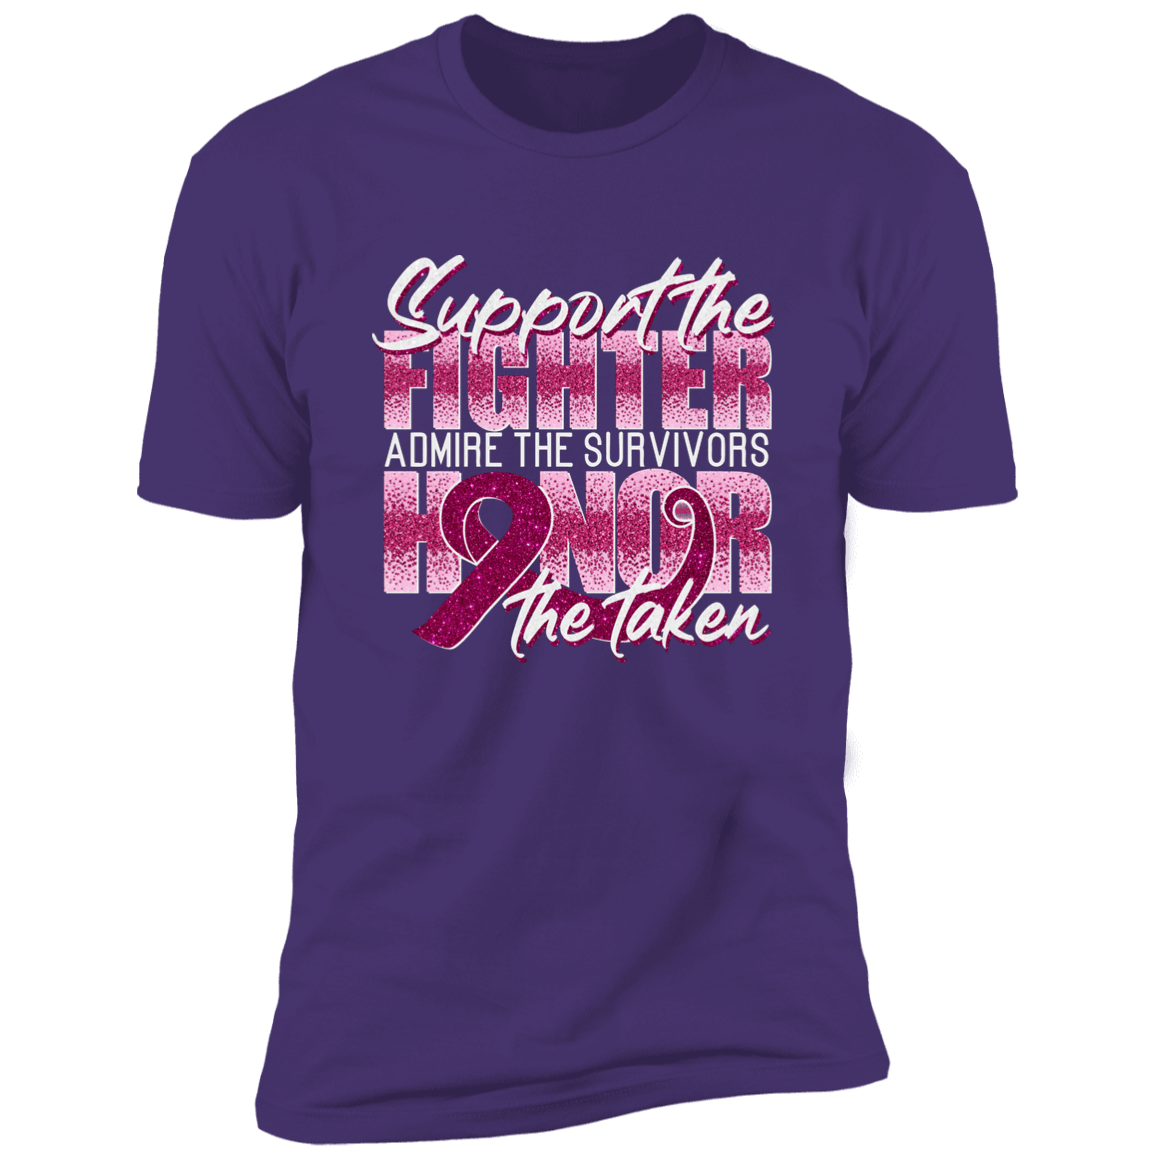 Supporting Admiring Honoring Design Breast Cancer Awareness T-Shirt